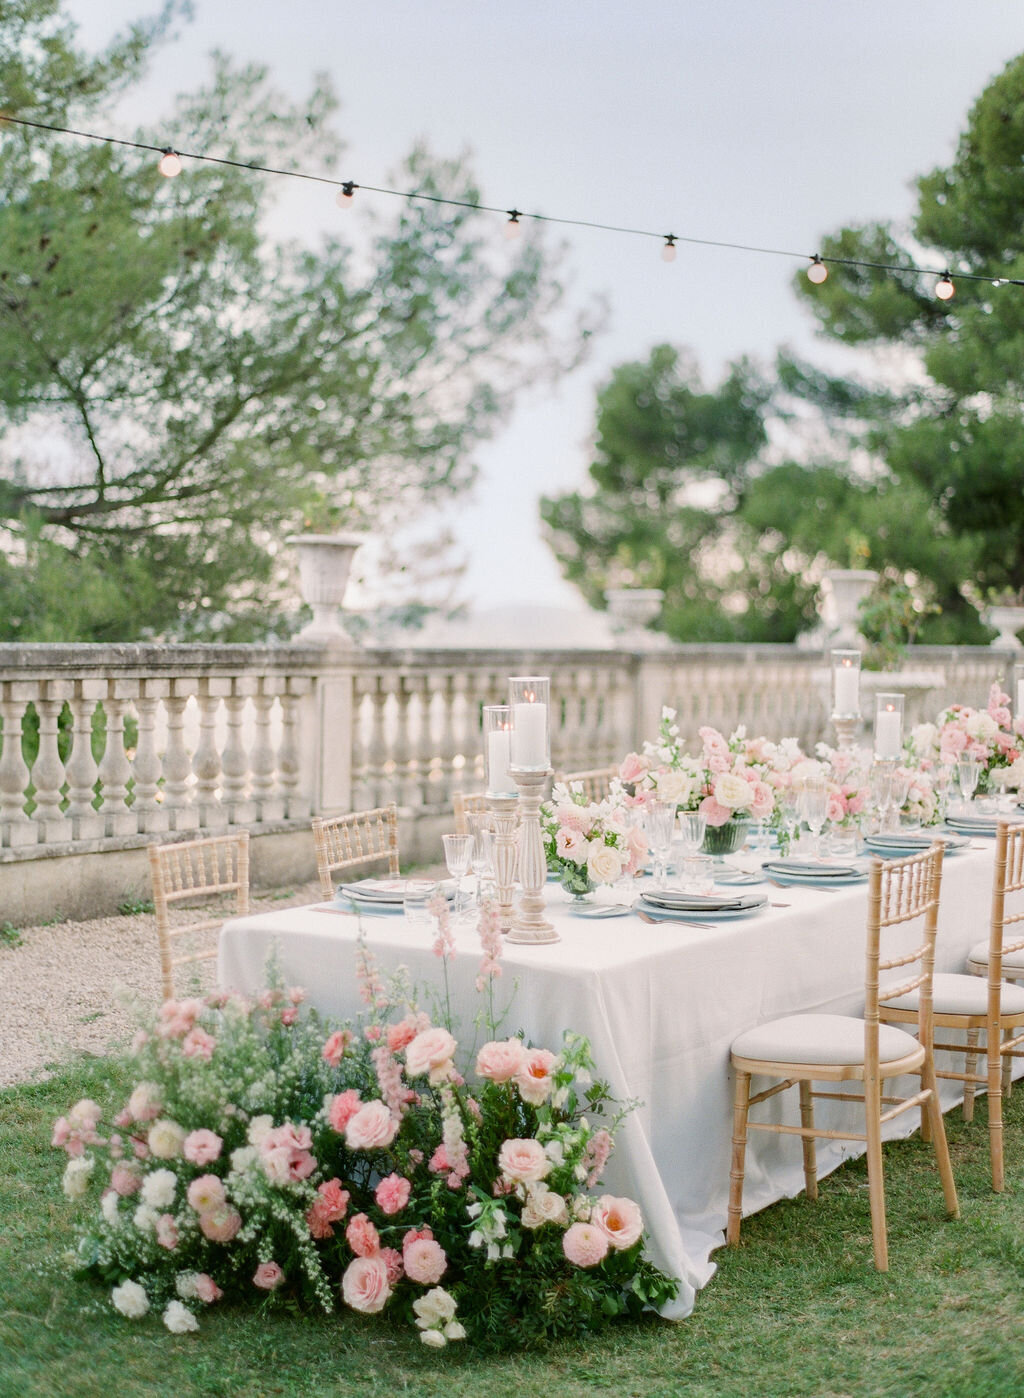 Jennifer Fox Weddings English speaking wedding planning & design agency in France crafting refined and bespoke weddings and celebrations Provence, Paris and destination Alyssa-Aaron-Wedding-Molly-Carr-Photography-Dinner-11